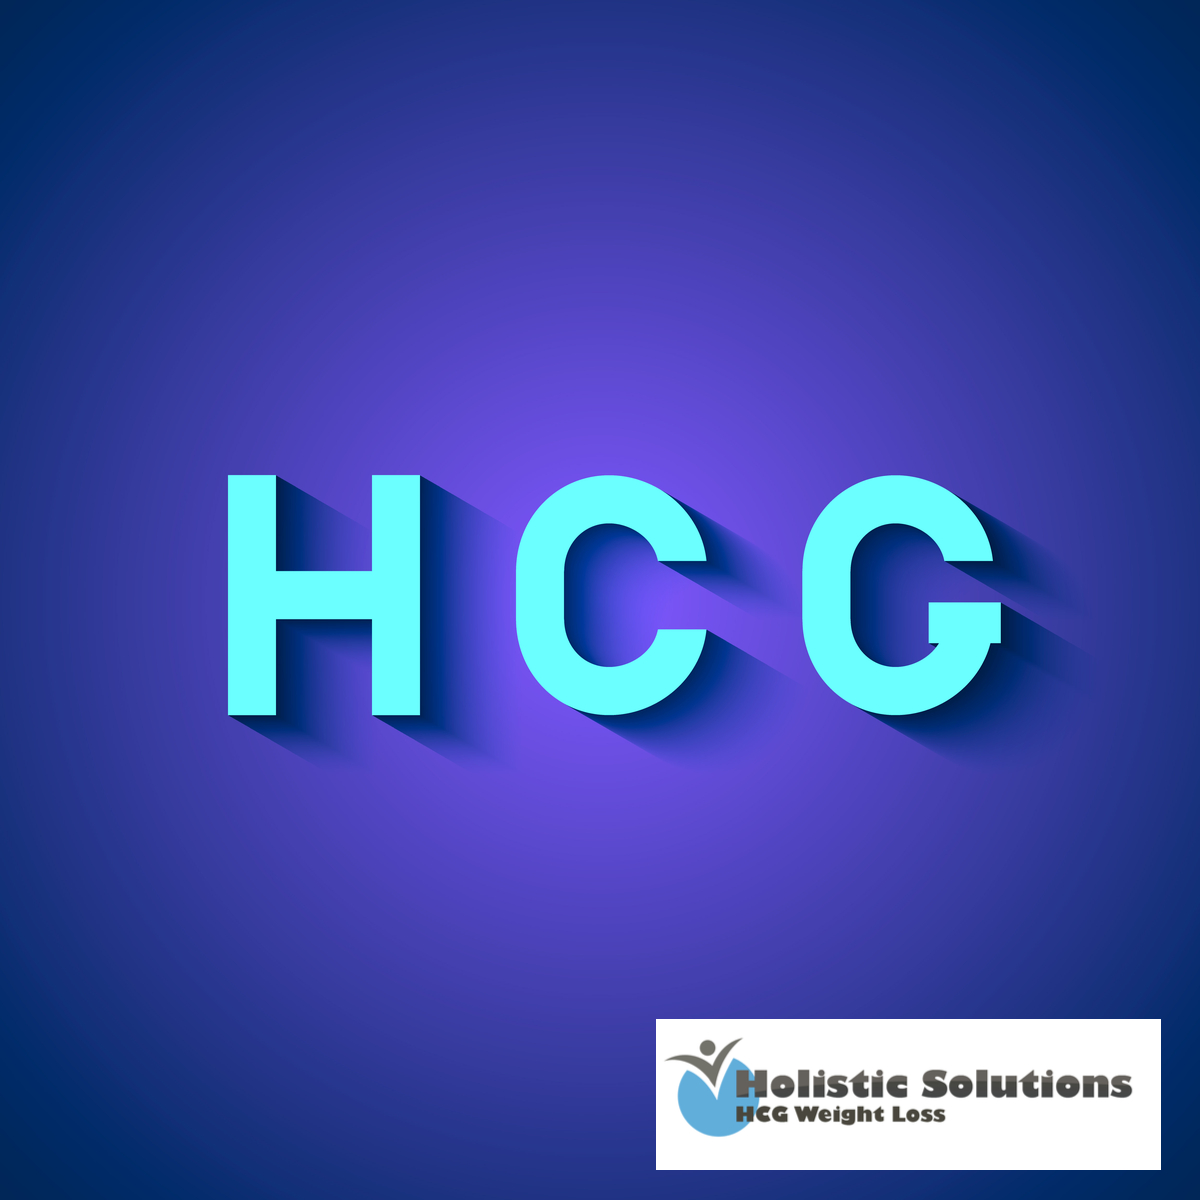 Did You Know There Is An HCG Weight Loss Clinic Near Thousand Oaks? 